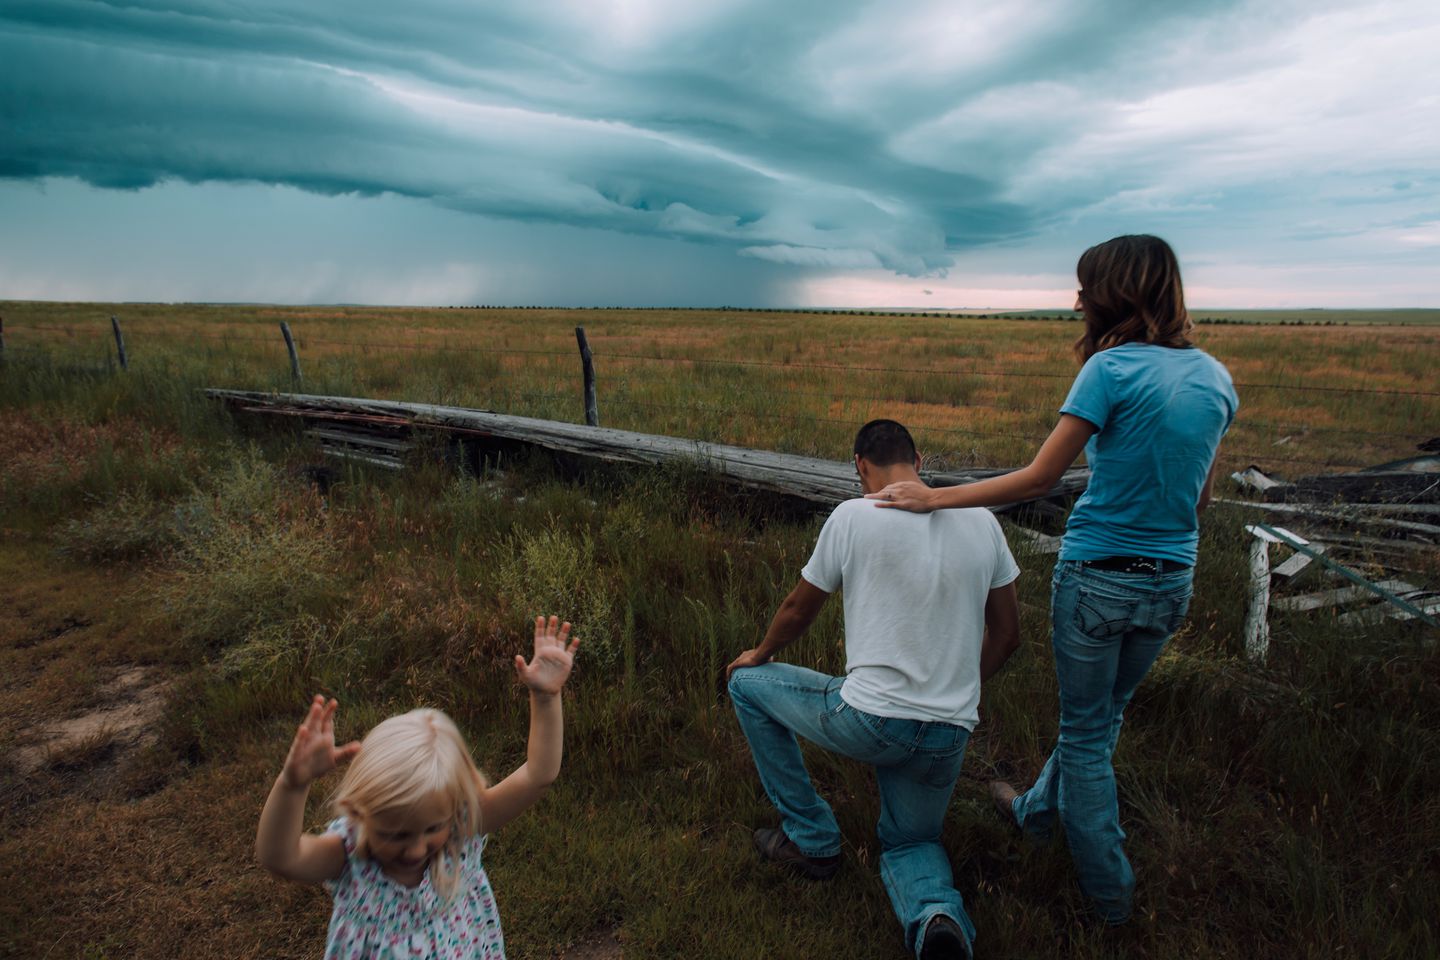 The arresting beauty of life on a wheat farm in Colorado – The Washington Post